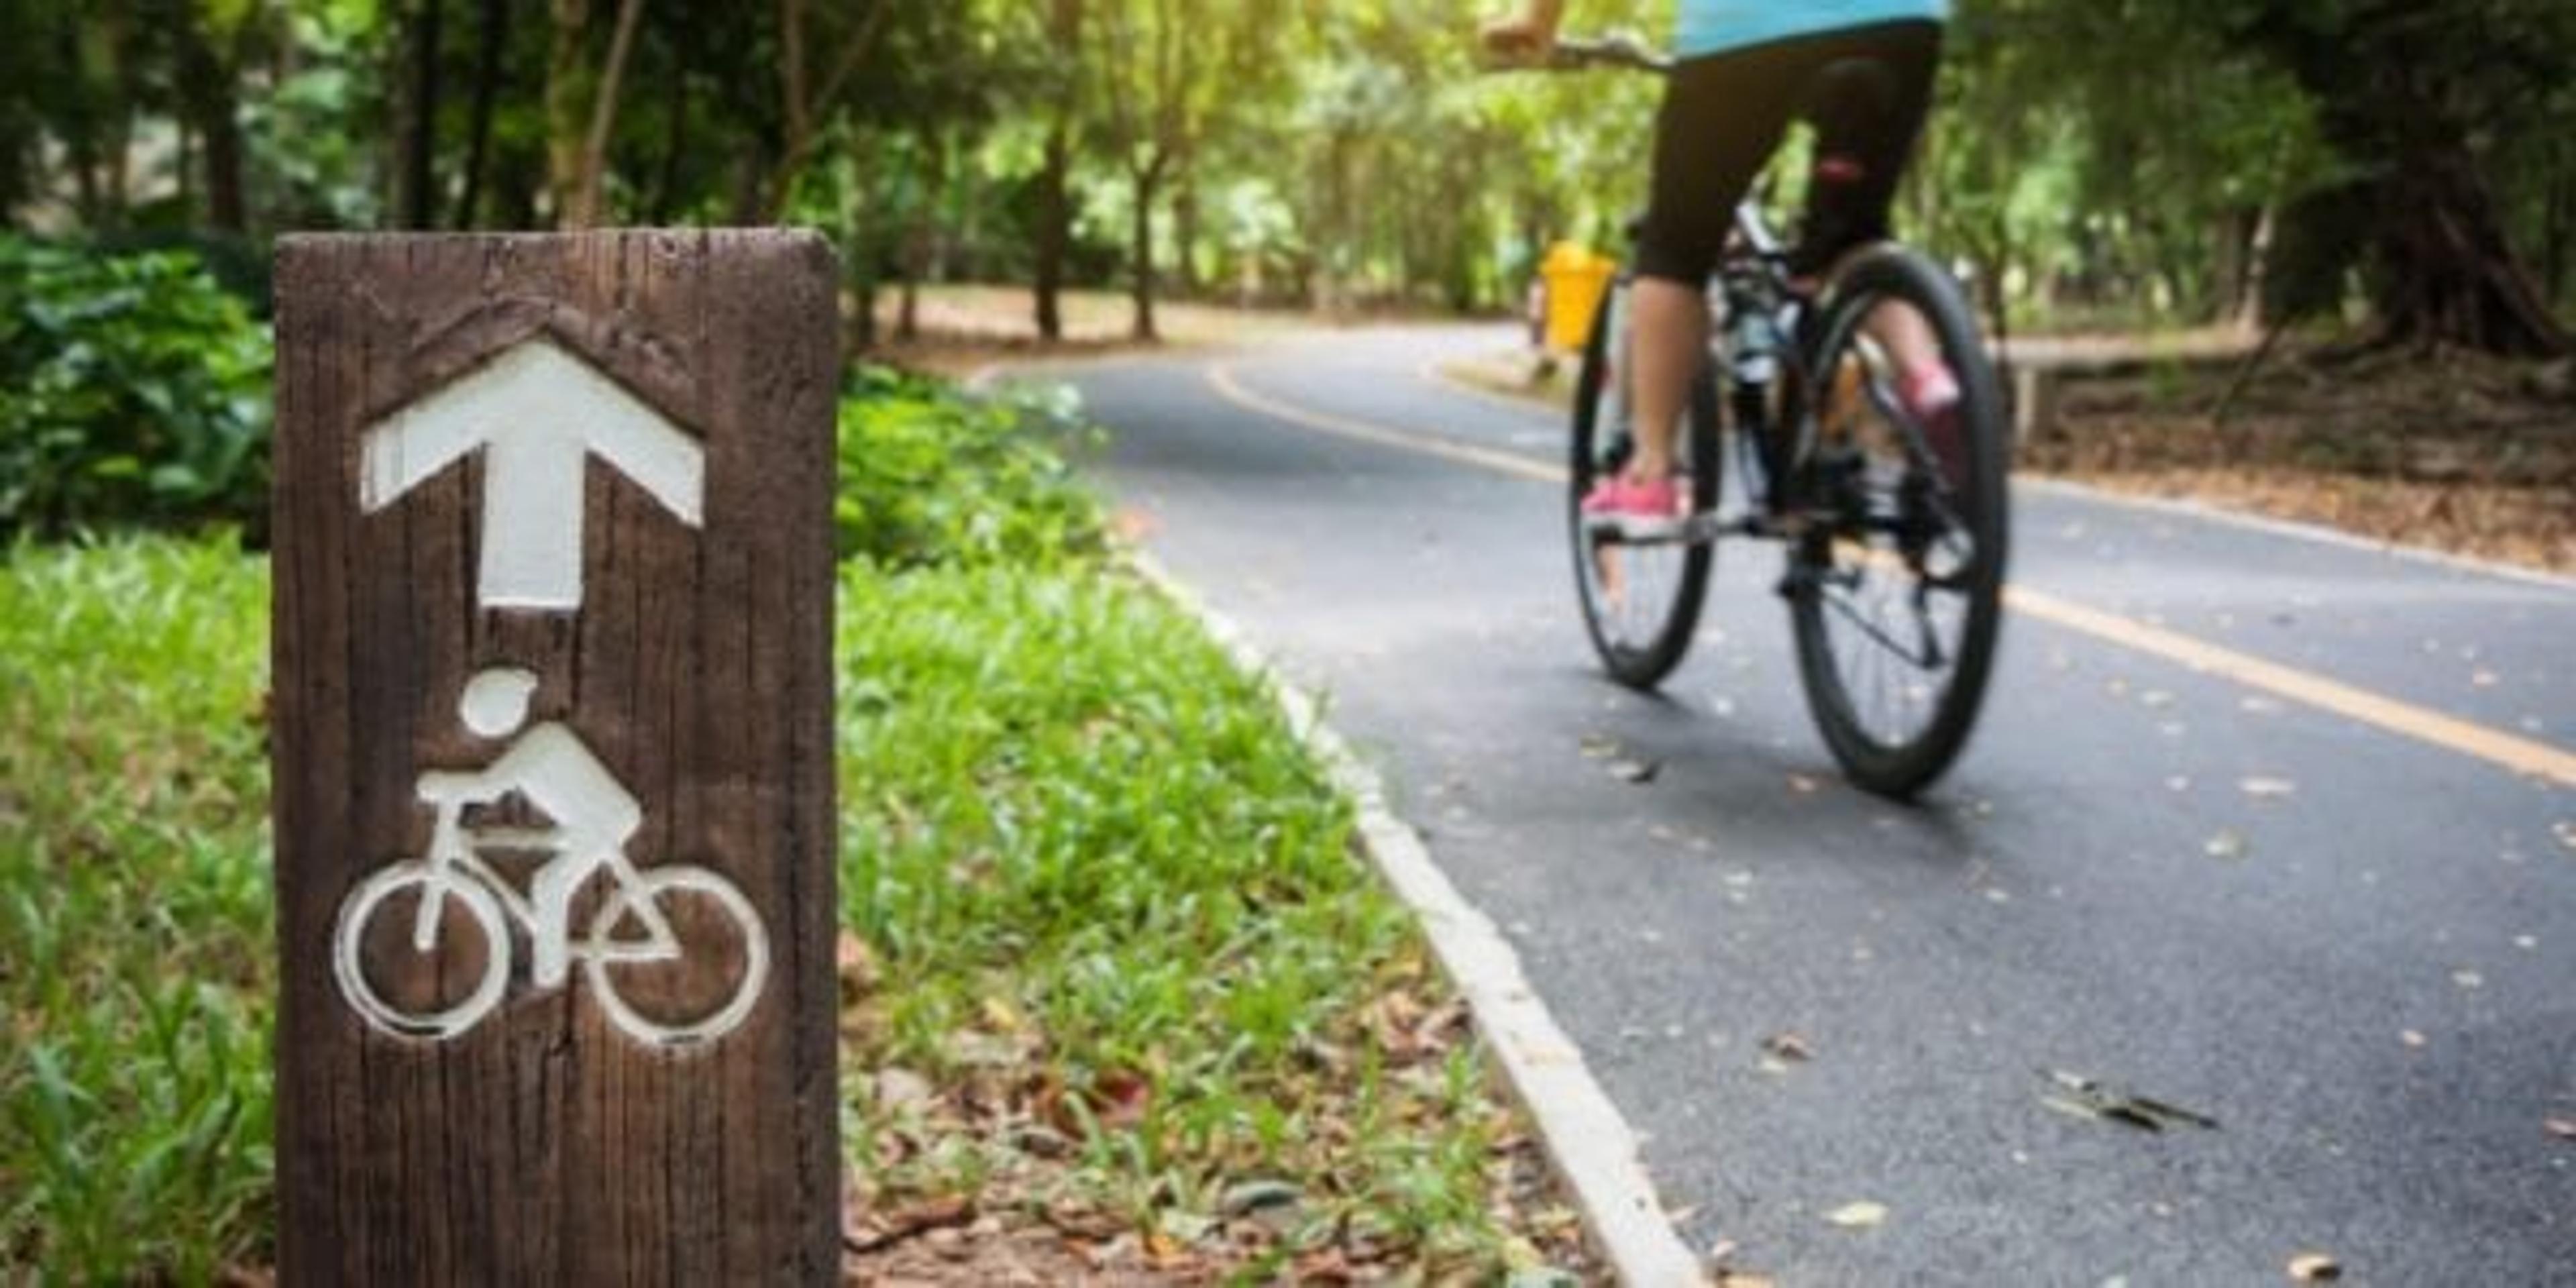 Bicycle sign, Bicycle Lane in public park